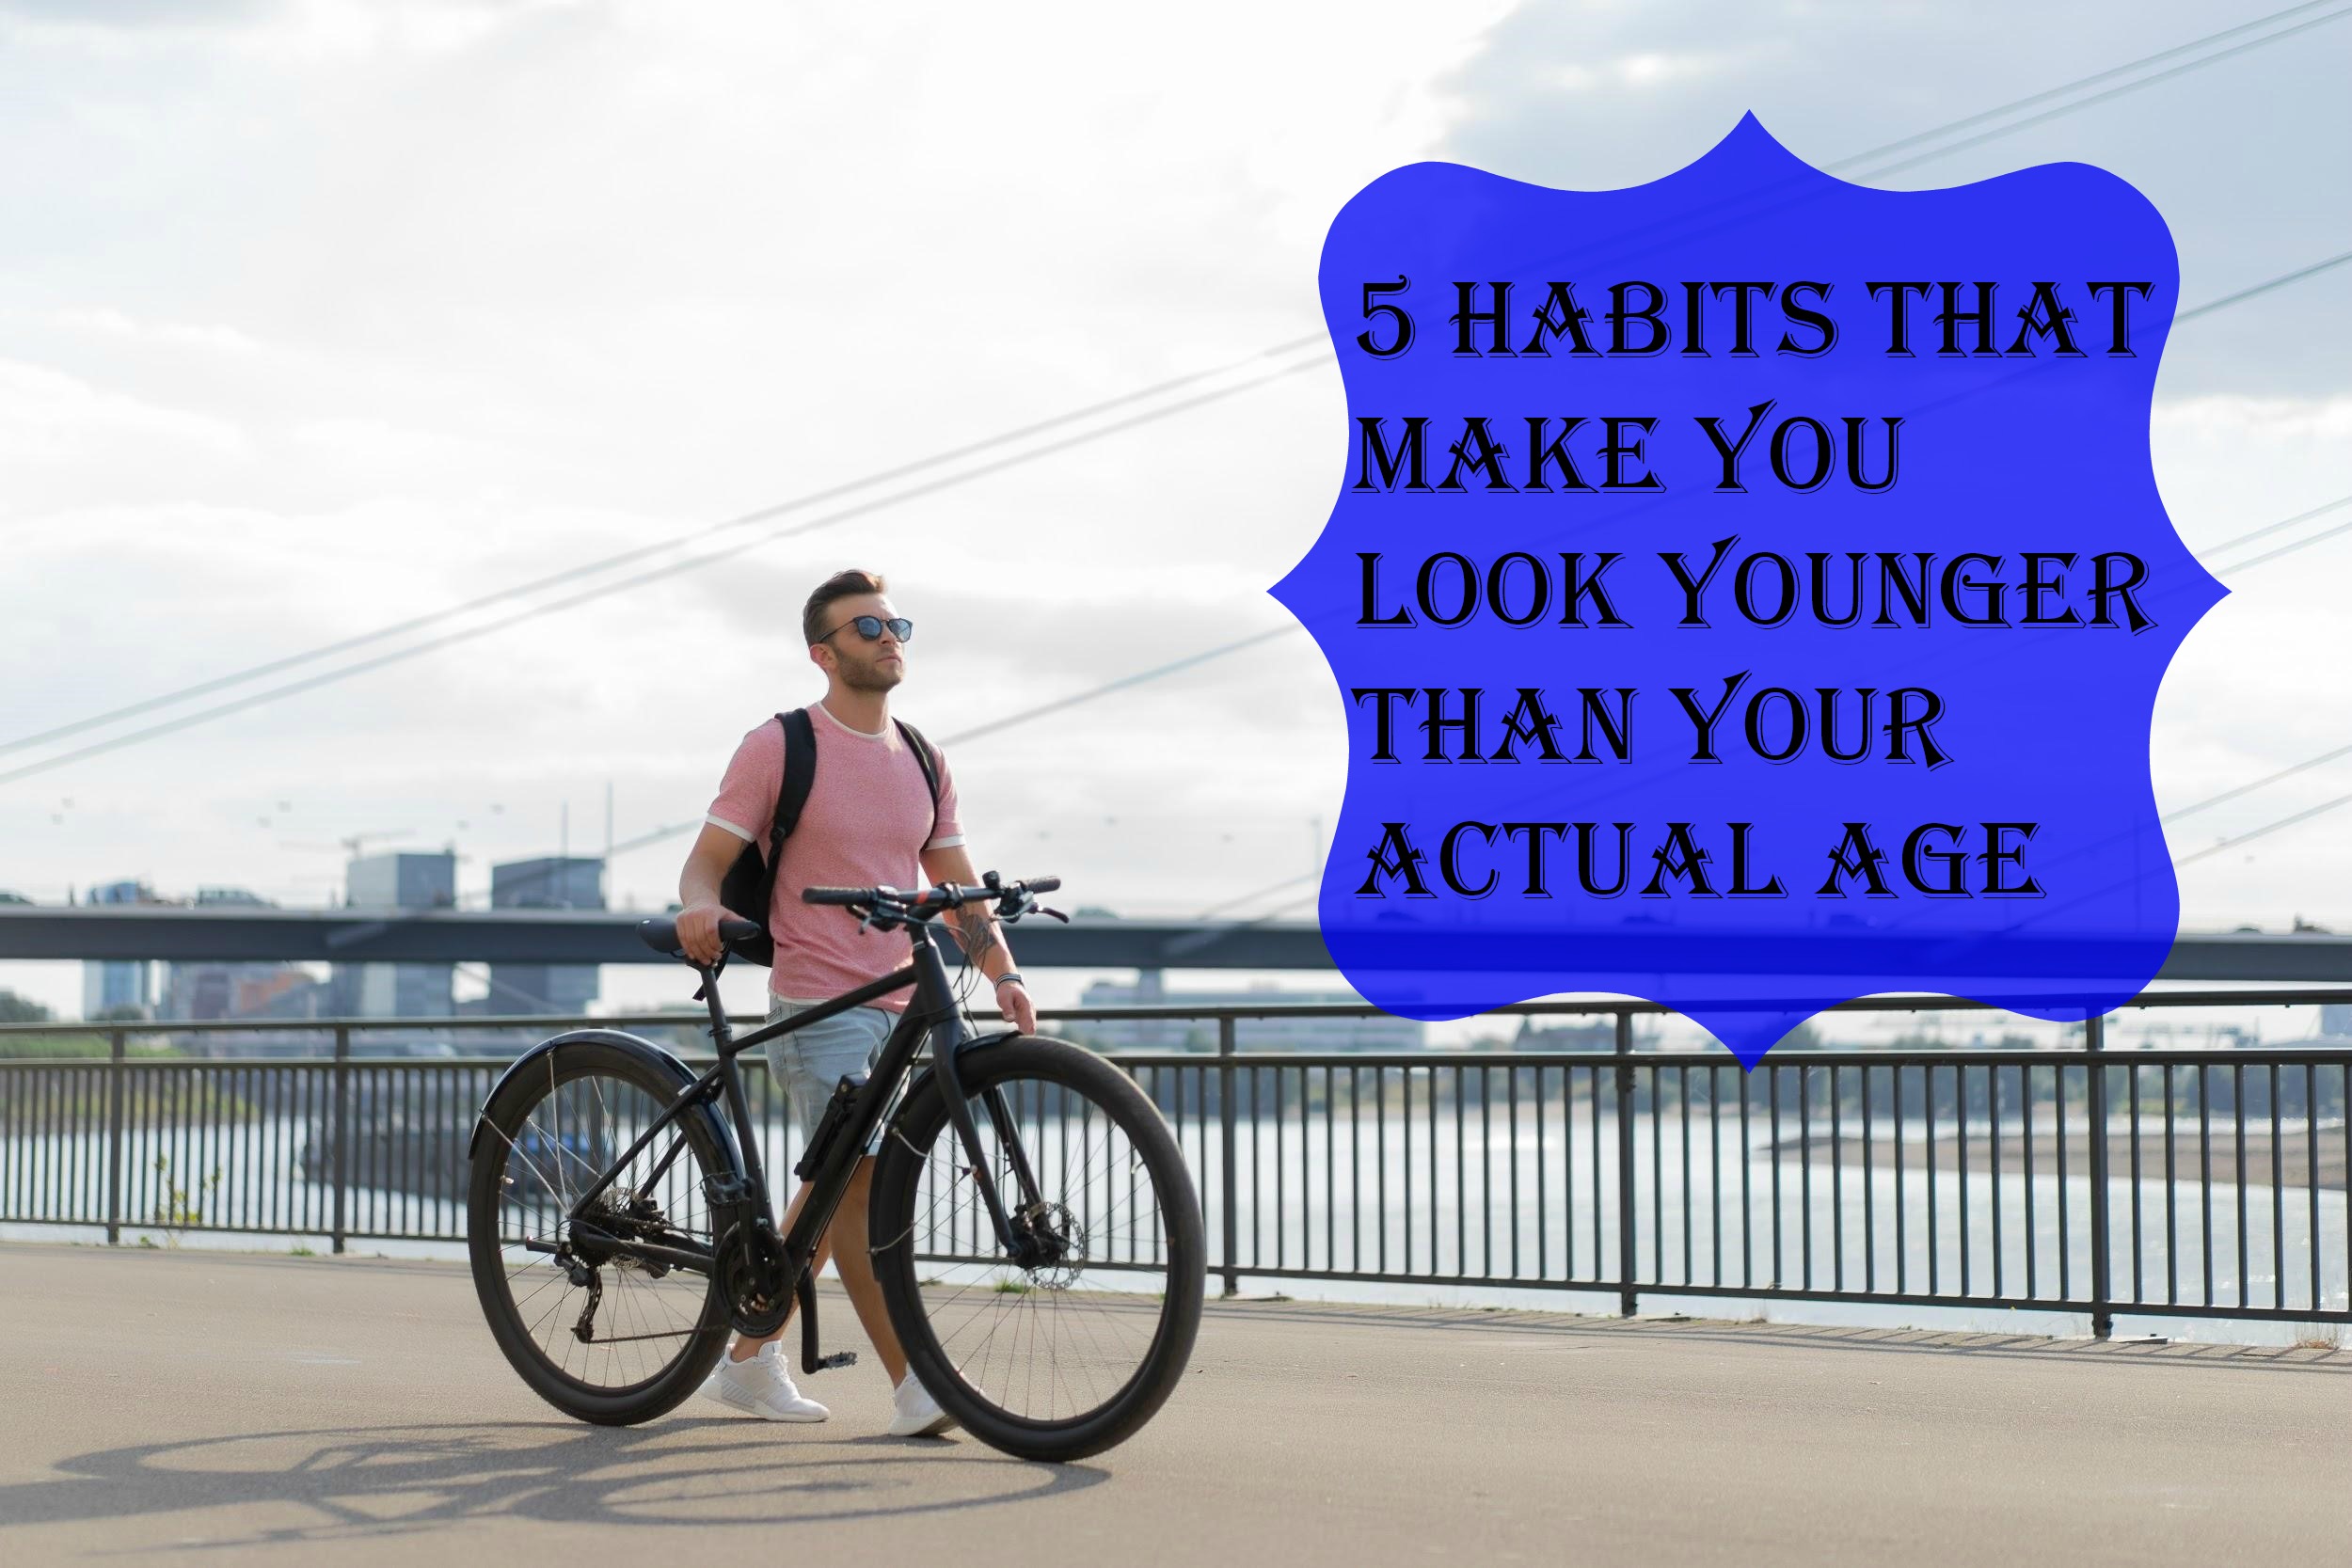 5 Habits That Make You Look Younger Than Your Actual Age